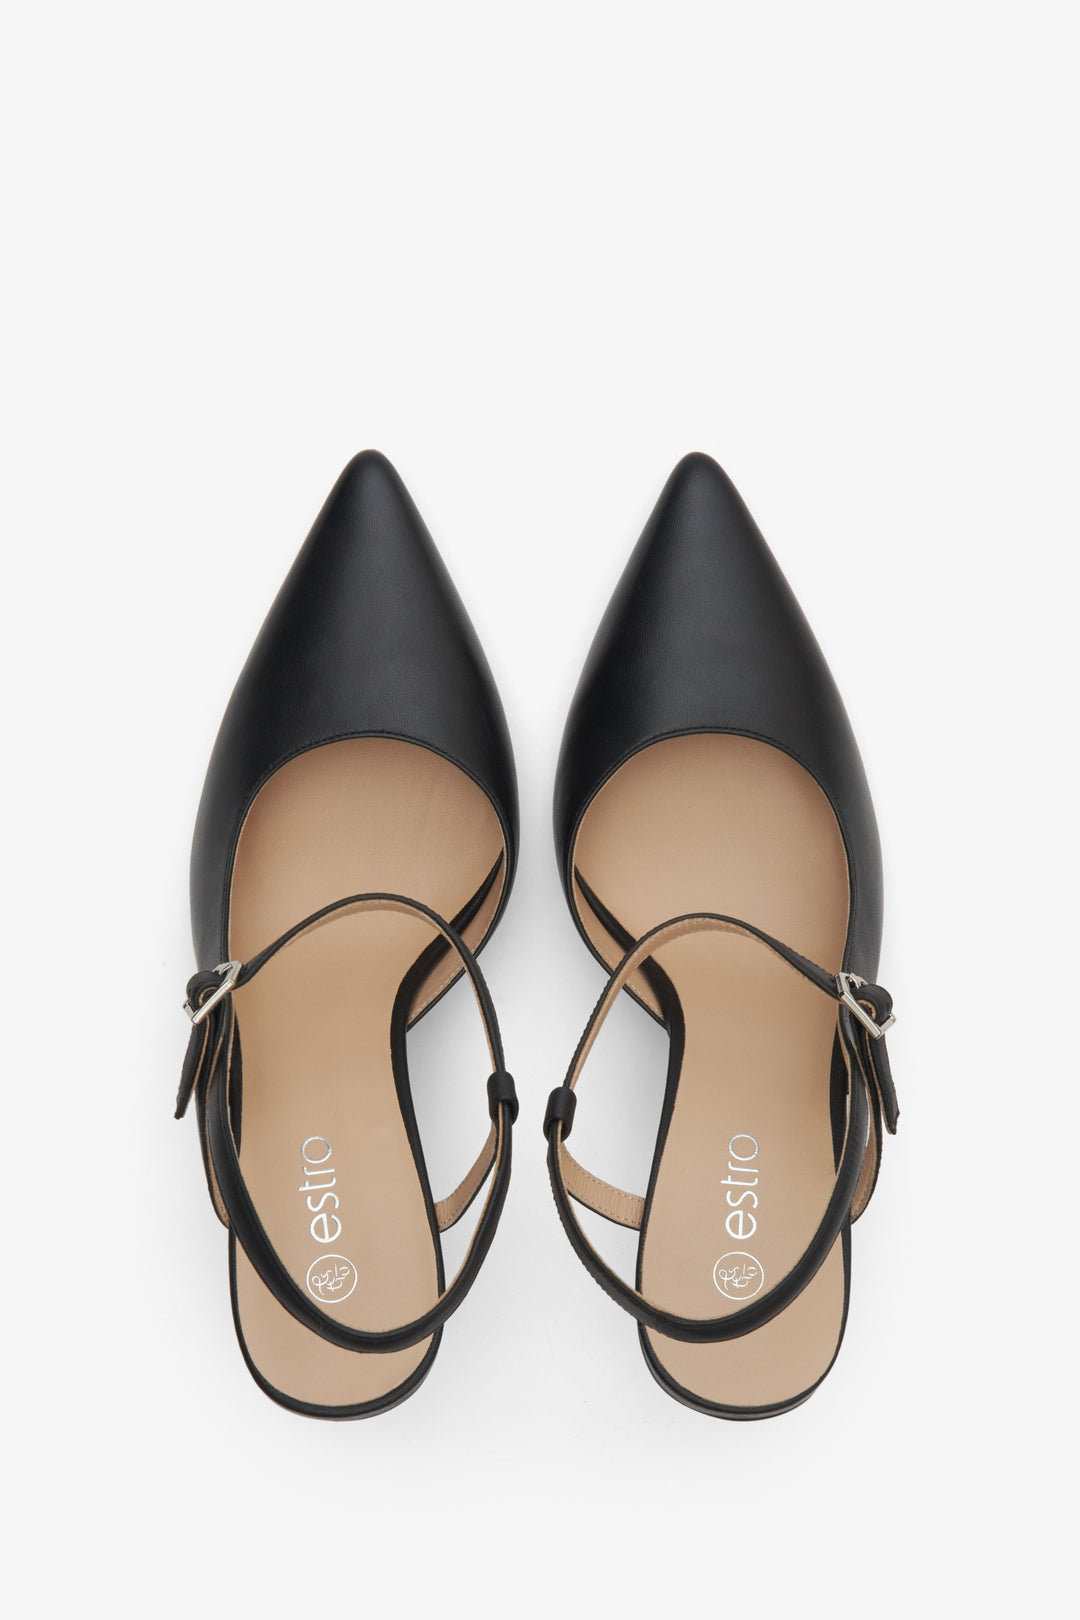 Women's black leather slingback shoes with a pointed toe on a high heel - presentation form above.